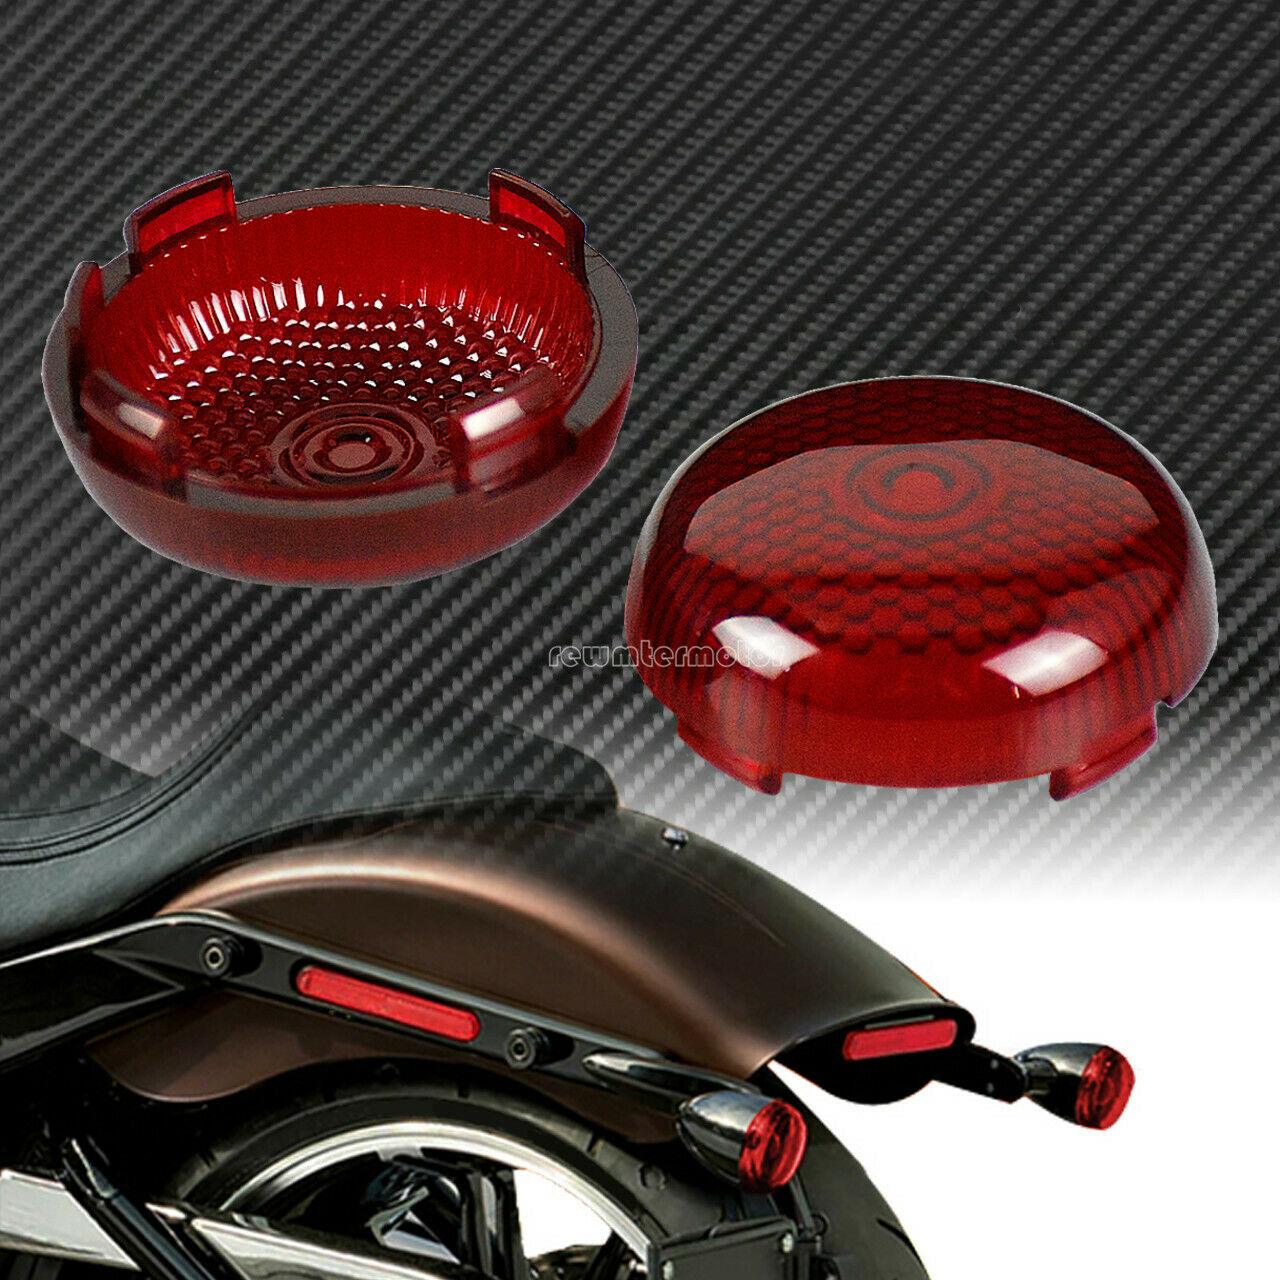 2x Red Bullet Turn Signals Light Lens Cover Fit For Harley Dyna Softail Touring - Moto Life Products